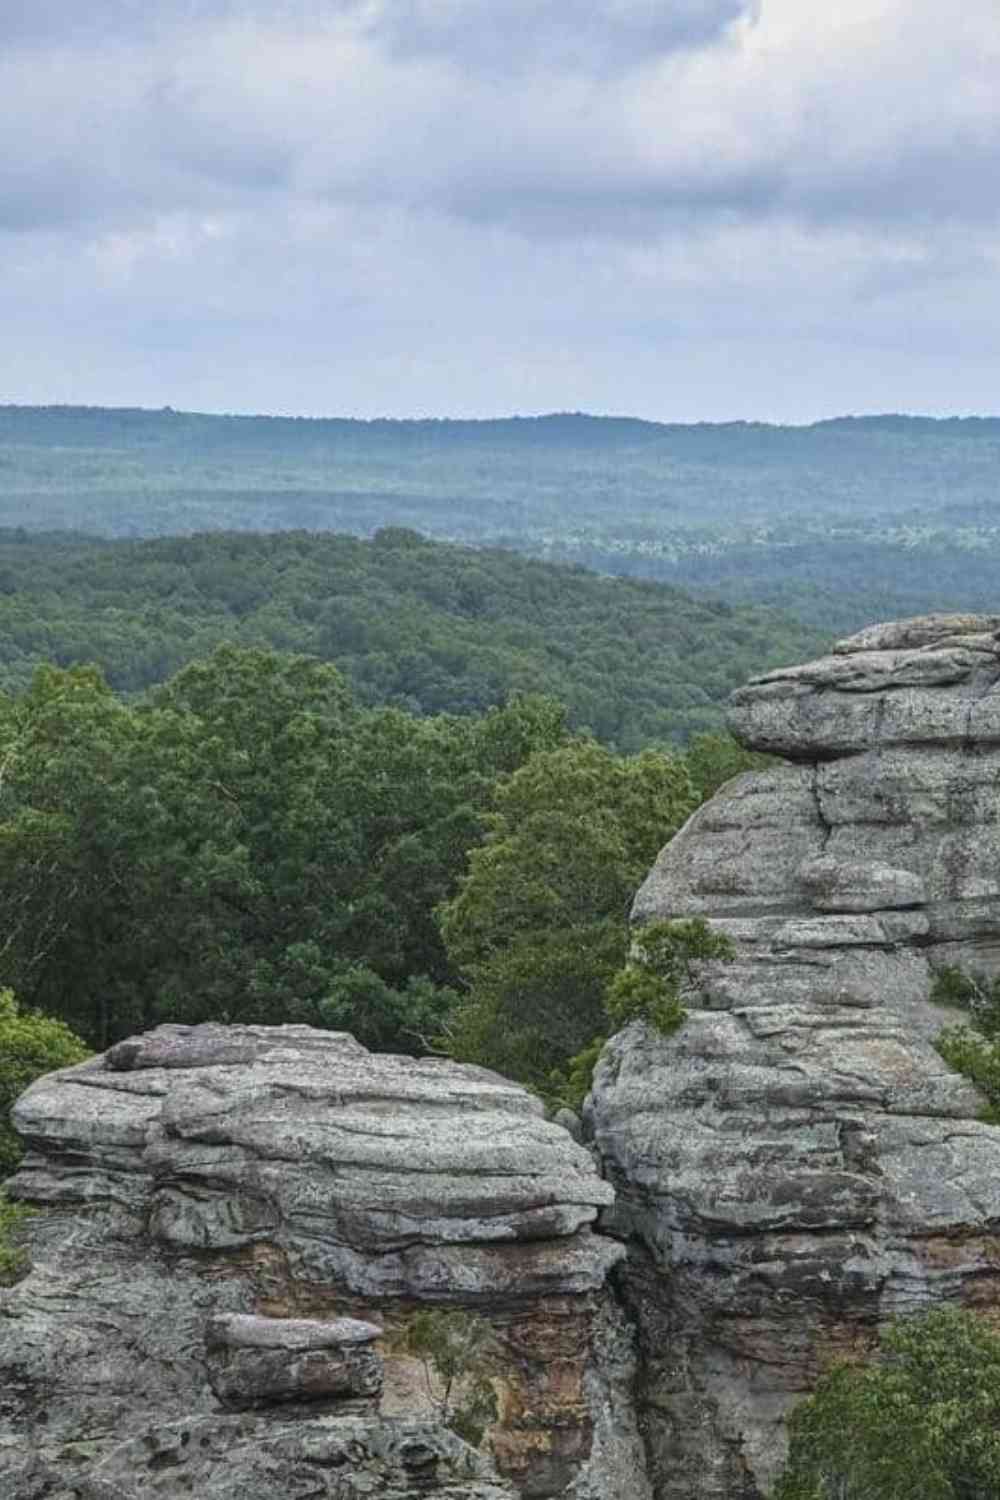 shawnee national forest in Illinois, USA